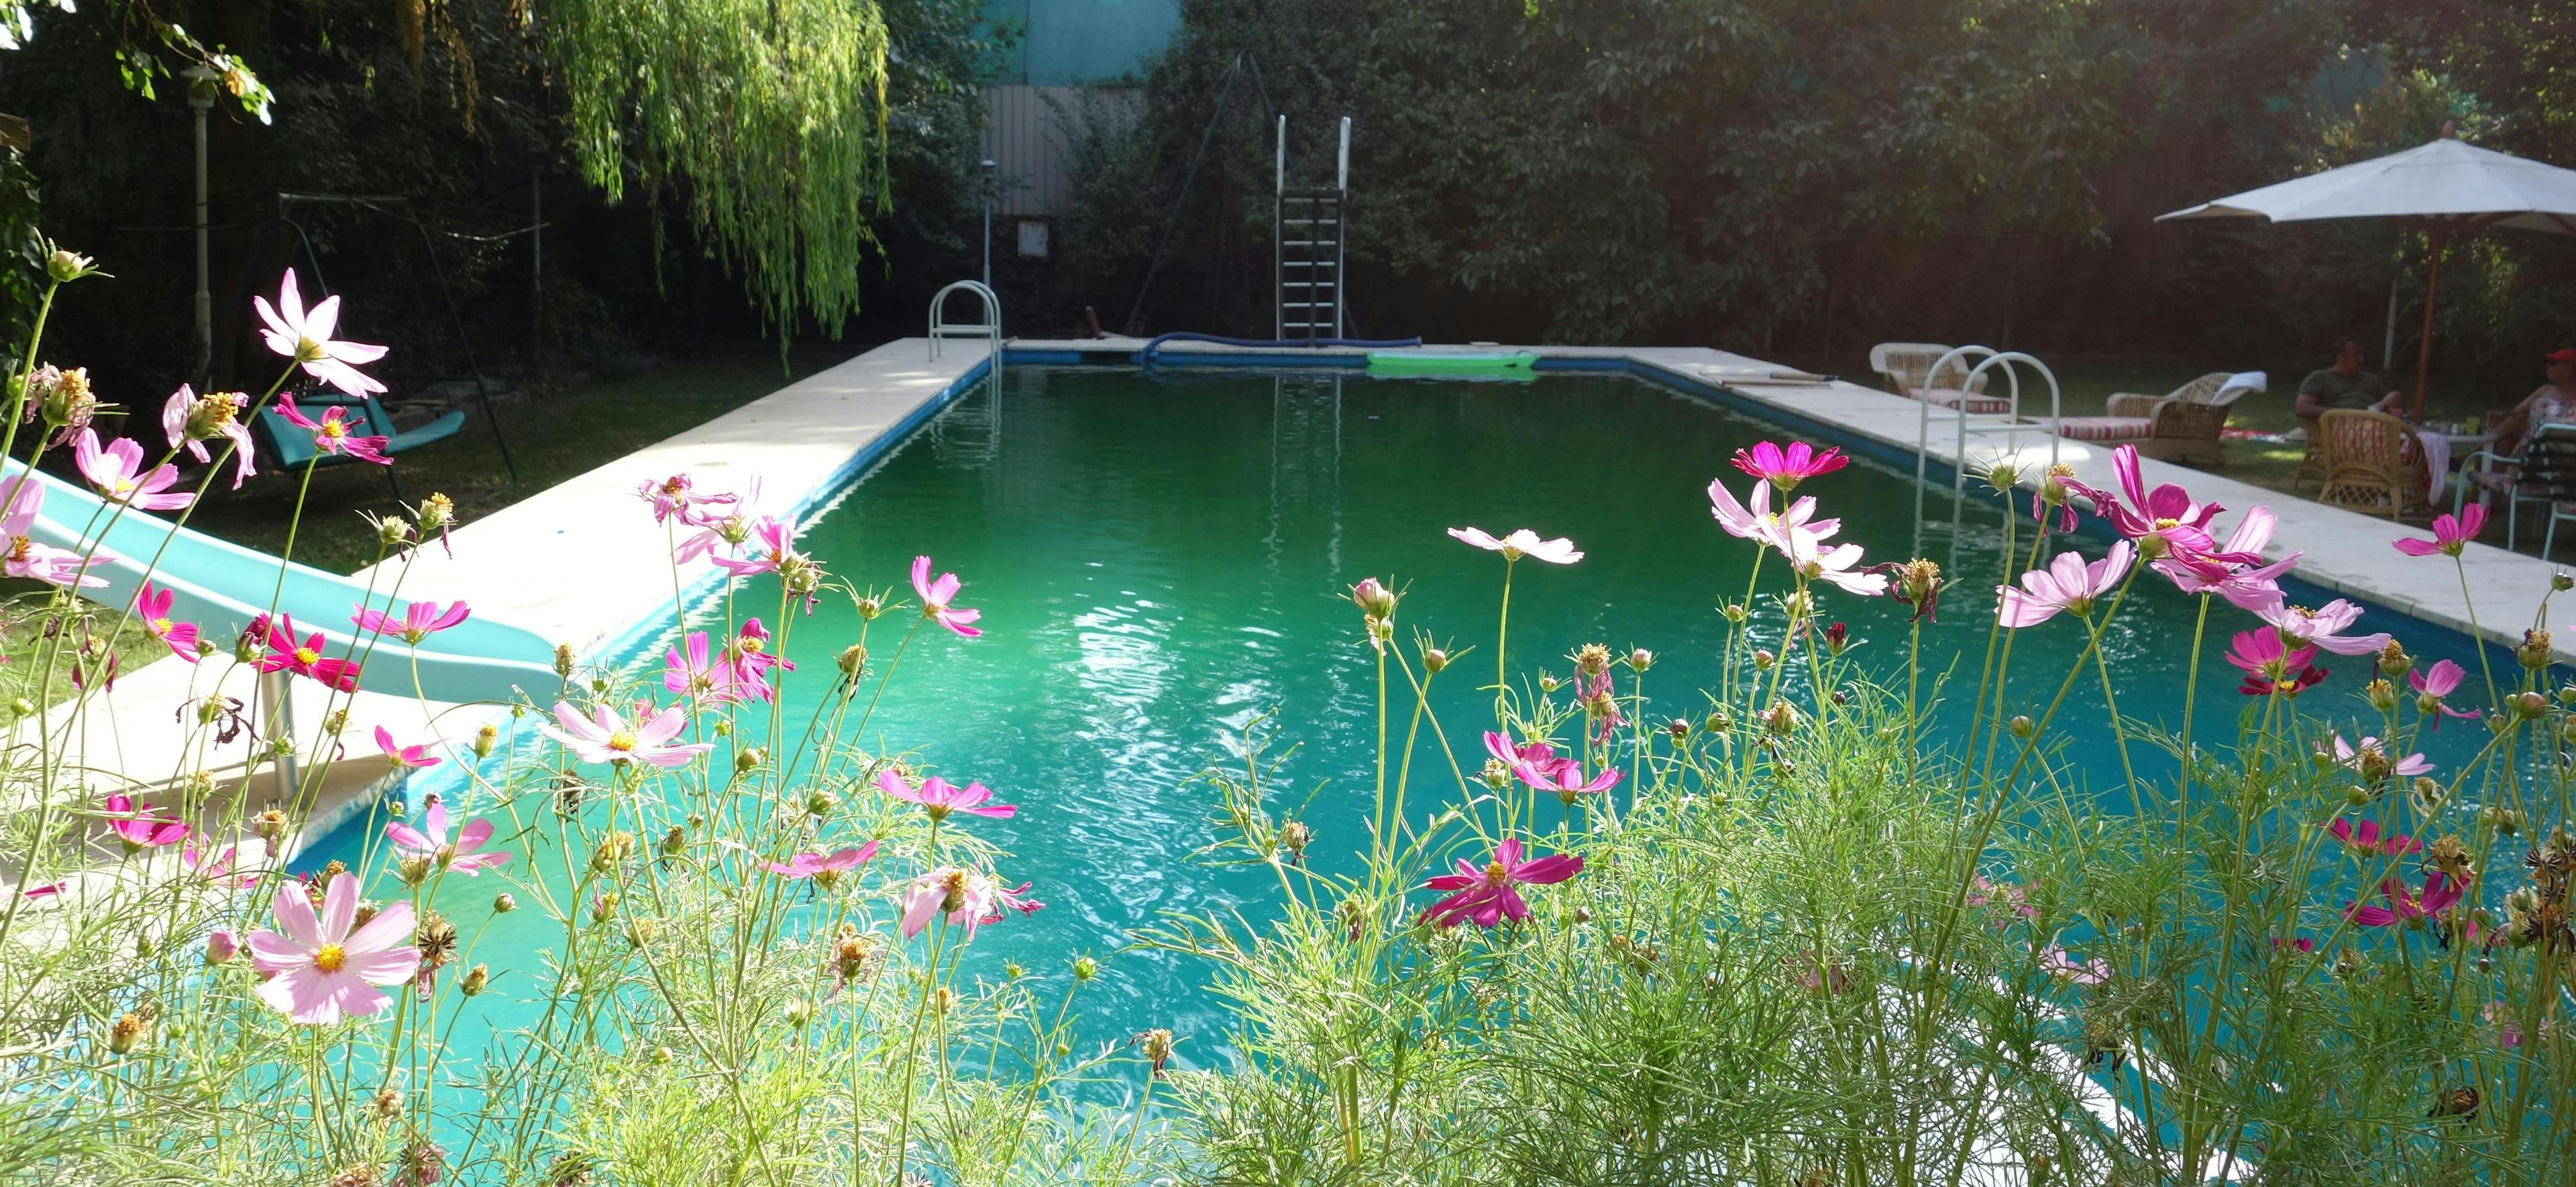 water pool outdoors nature person human swimming pool plant